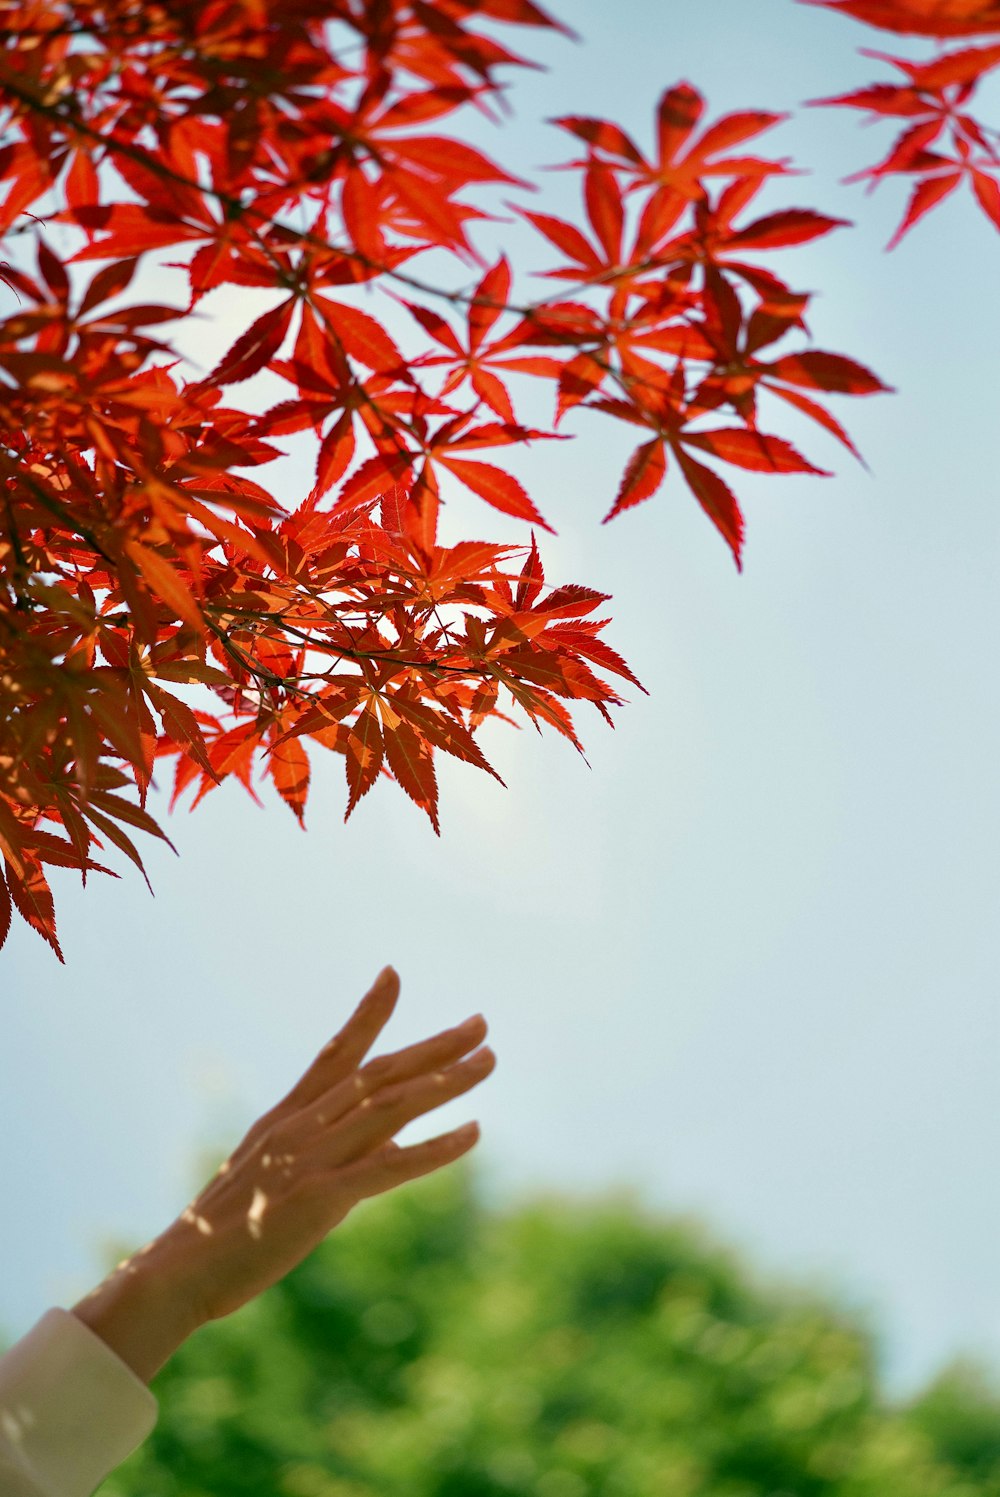 a person reaching up to a tree with red leaves